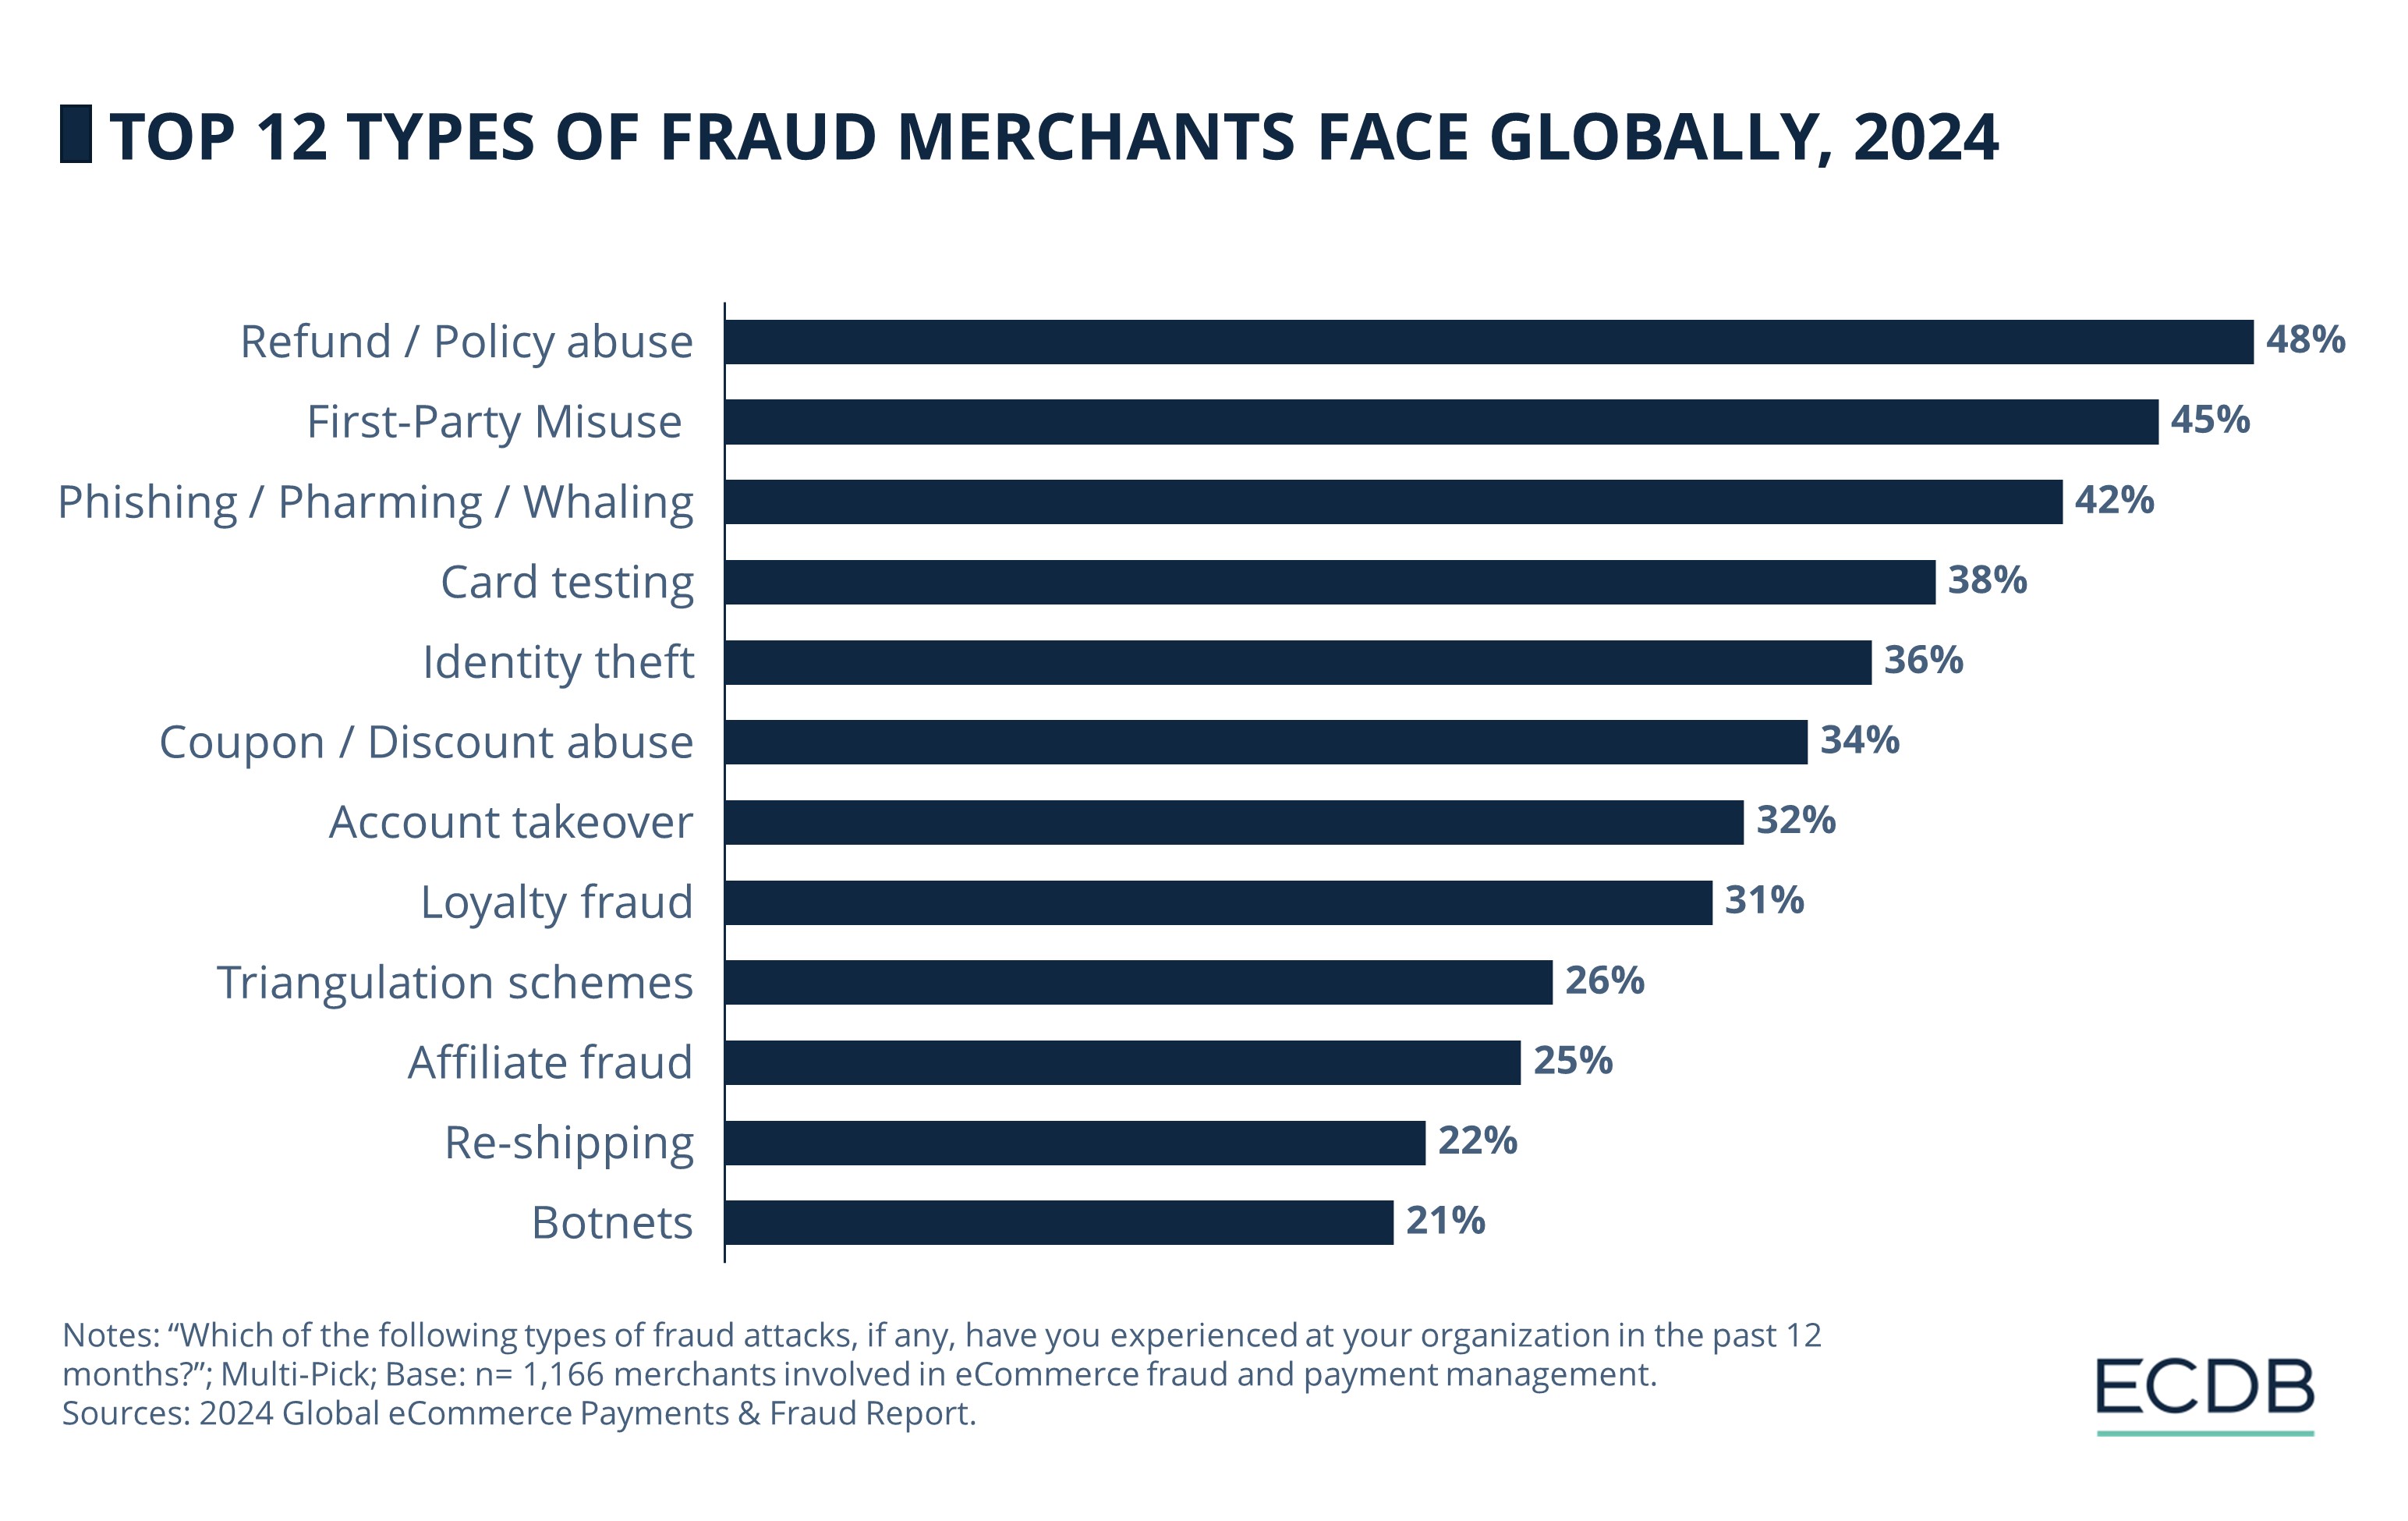 Top 12 Types of Fraud Merchants Face Globally, 2024